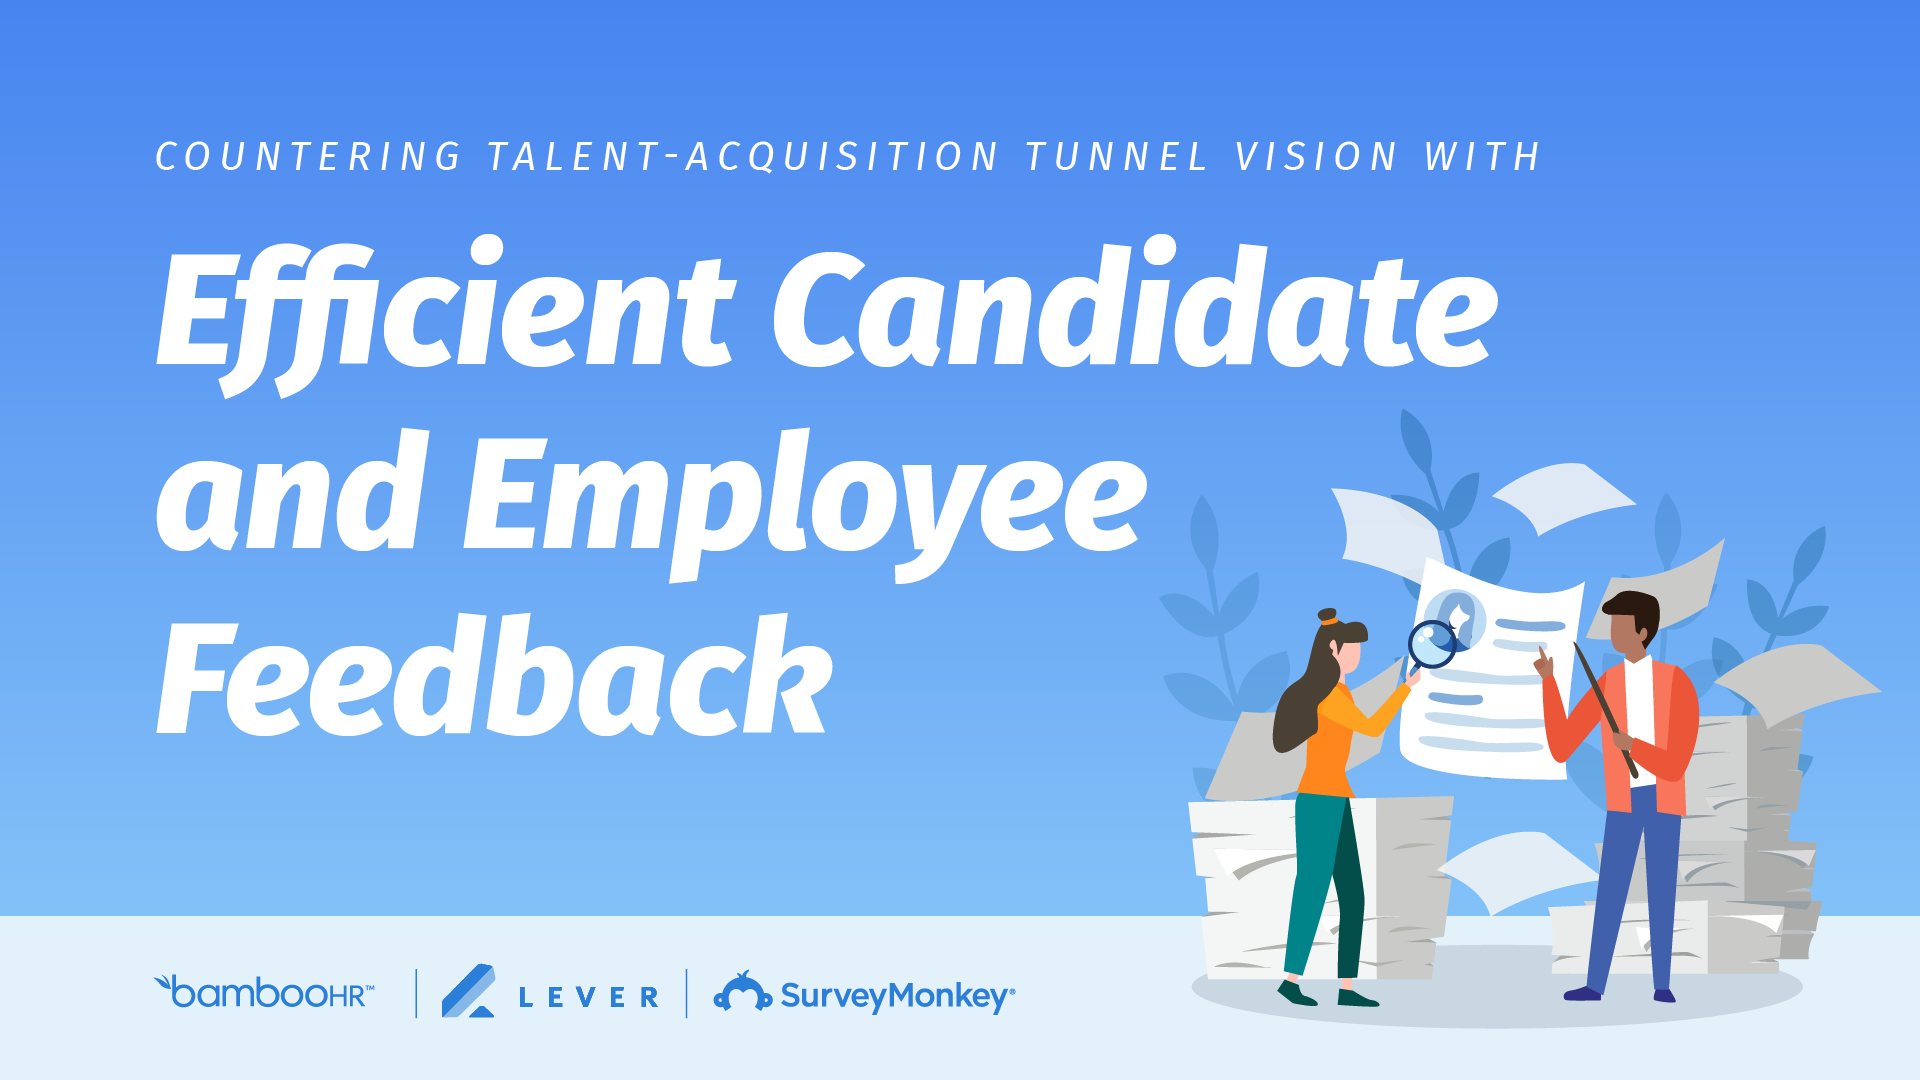 Countering Talent-Acquisition Tunnel Vision with Efficient Candidate and Employee Feedback